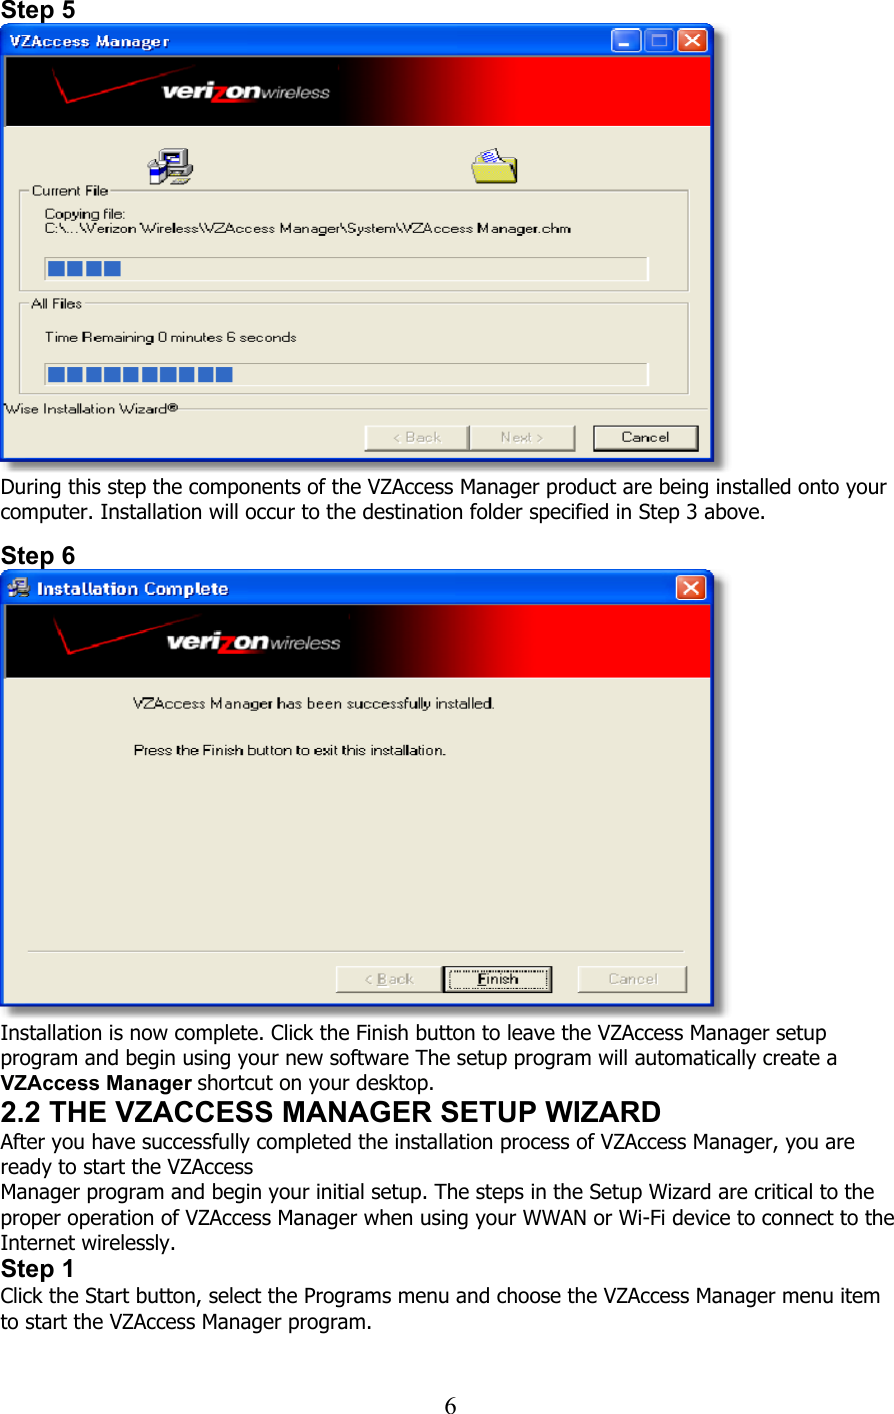  6Step 5  During this step the components of the VZAccess Manager product are being installed onto your computer. Installation will occur to the destination folder specified in Step 3 above.   Step 6  Installation is now complete. Click the Finish button to leave the VZAccess Manager setup program and begin using your new software The setup program will automatically create a VZAccess Manager shortcut on your desktop. 2.2 THE VZACCESS MANAGER SETUP WIZARD After you have successfully completed the installation process of VZAccess Manager, you are ready to start the VZAccess Manager program and begin your initial setup. The steps in the Setup Wizard are critical to the proper operation of VZAccess Manager when using your WWAN or Wi-Fi device to connect to the Internet wirelessly. Step 1 Click the Start button, select the Programs menu and choose the VZAccess Manager menu item to start the VZAccess Manager program.   